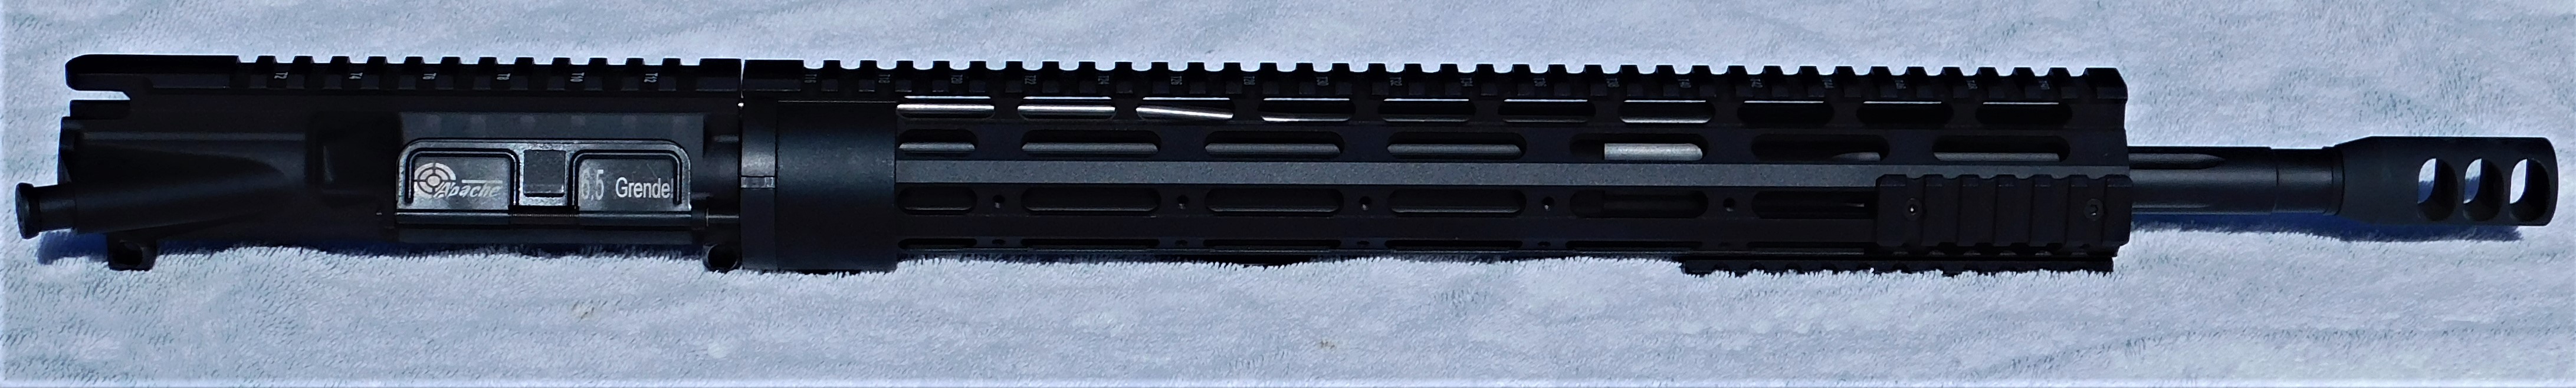 6.5 Grendle 18 inch QPQ with 15 inch Monolithic Rail 